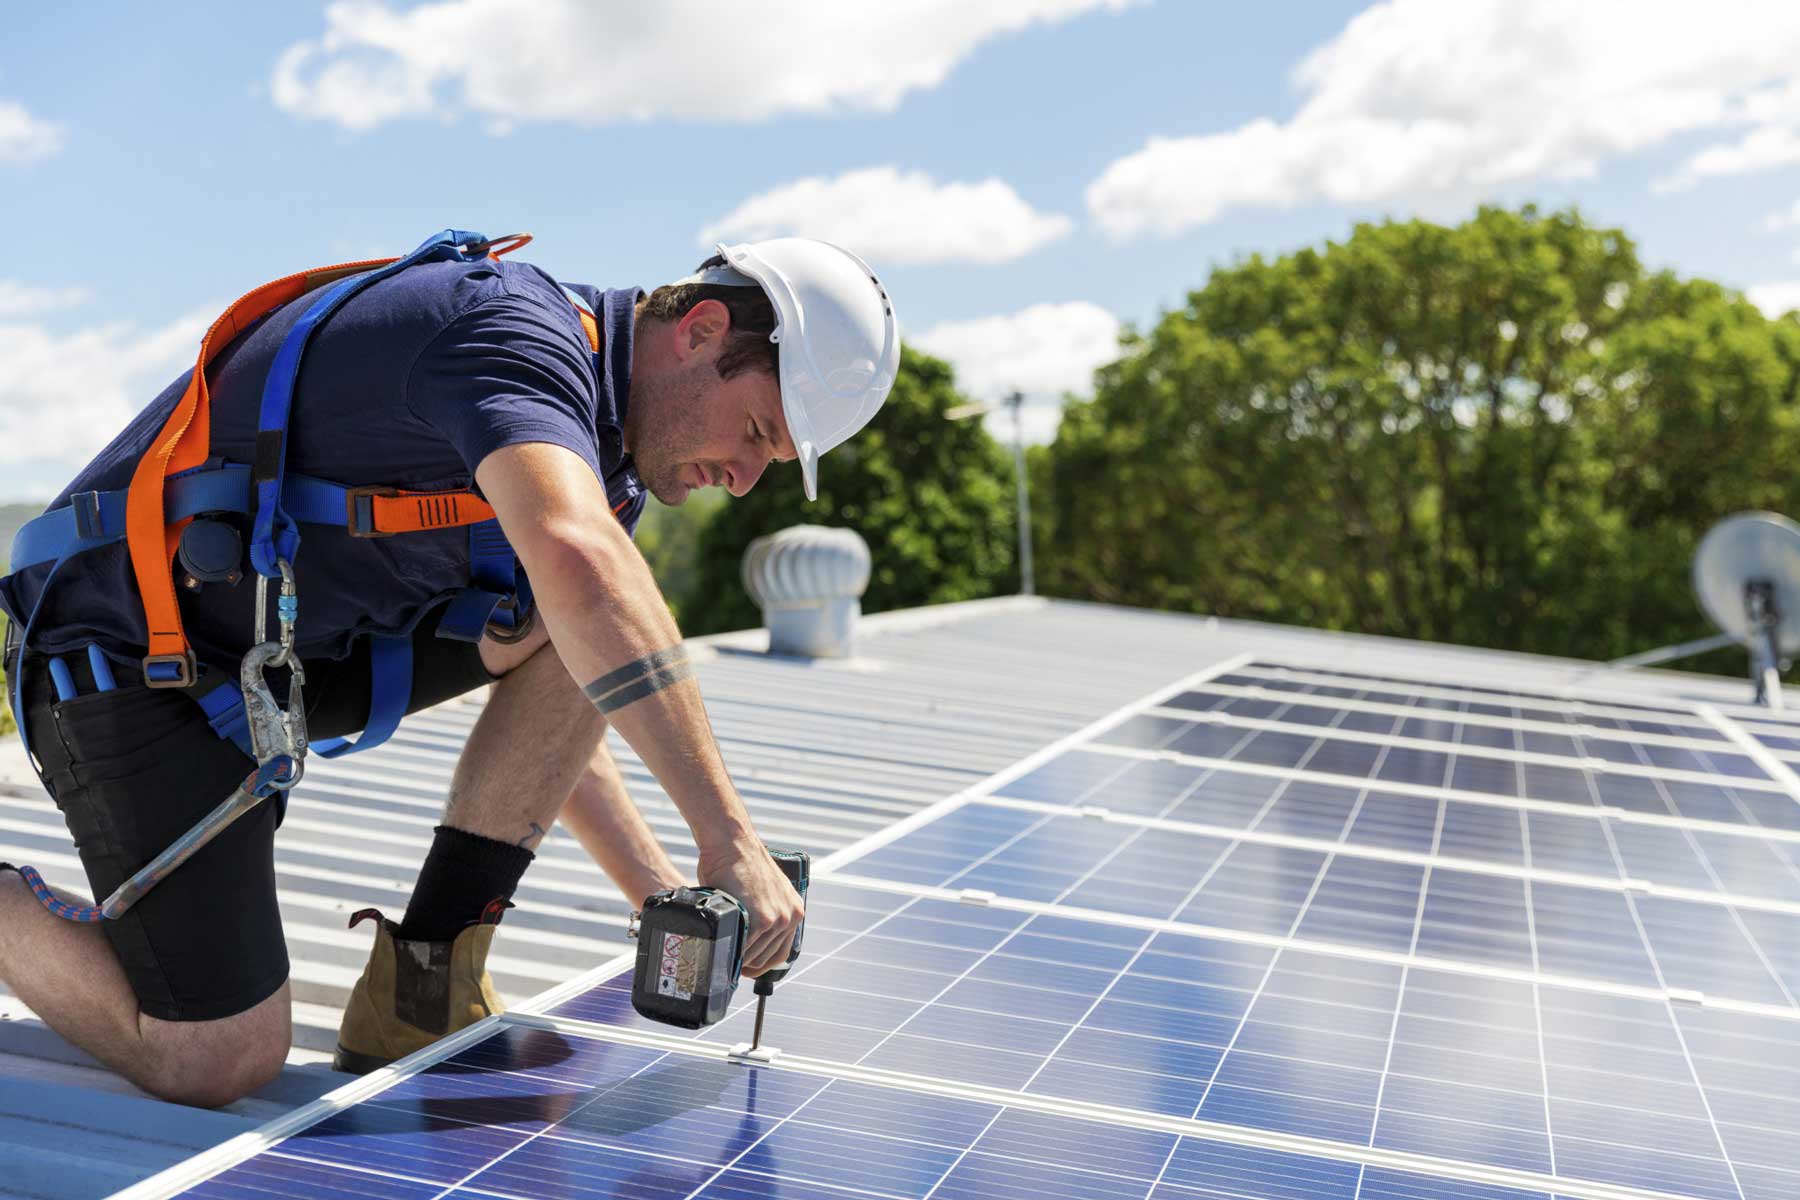 A Man Installing Solar Panels On The Roof Of A House- Residential Solar Roofing Nashville - Music City Solar Solutions 2306 Eugenia Ave Suite A Nashville TN 37211 (615) 692-1602